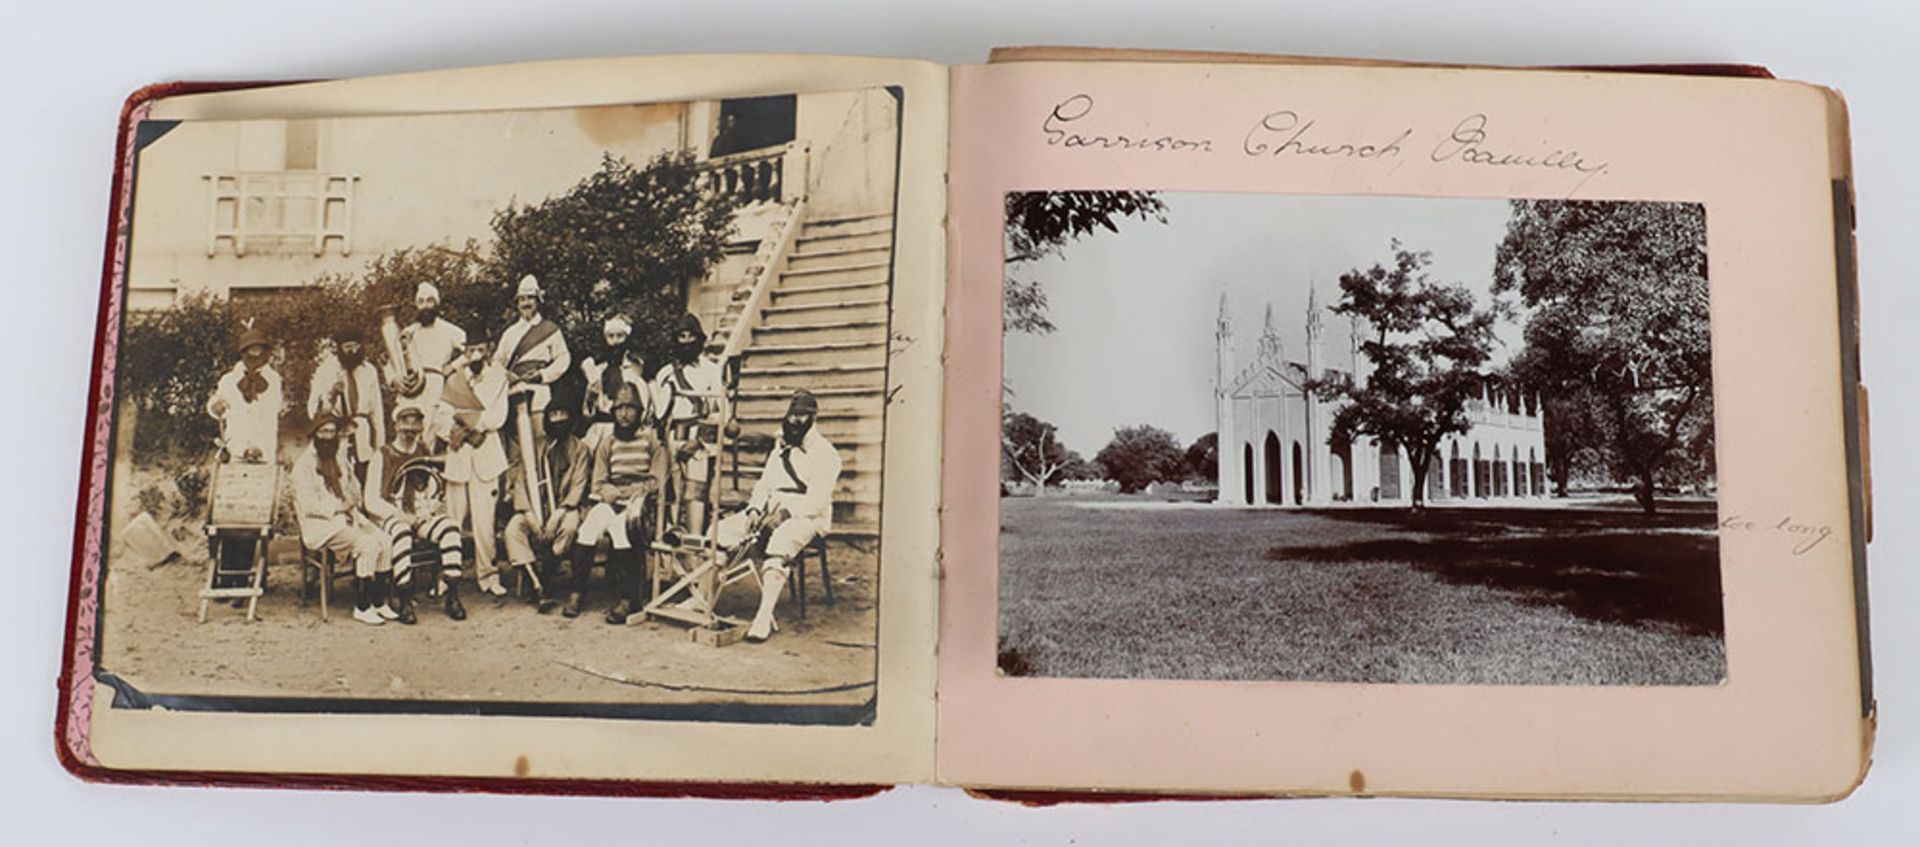 Photograph Album with images of ther Delhi Durbar, troops lining streets, Elephants, sacred cows bel - Image 4 of 48